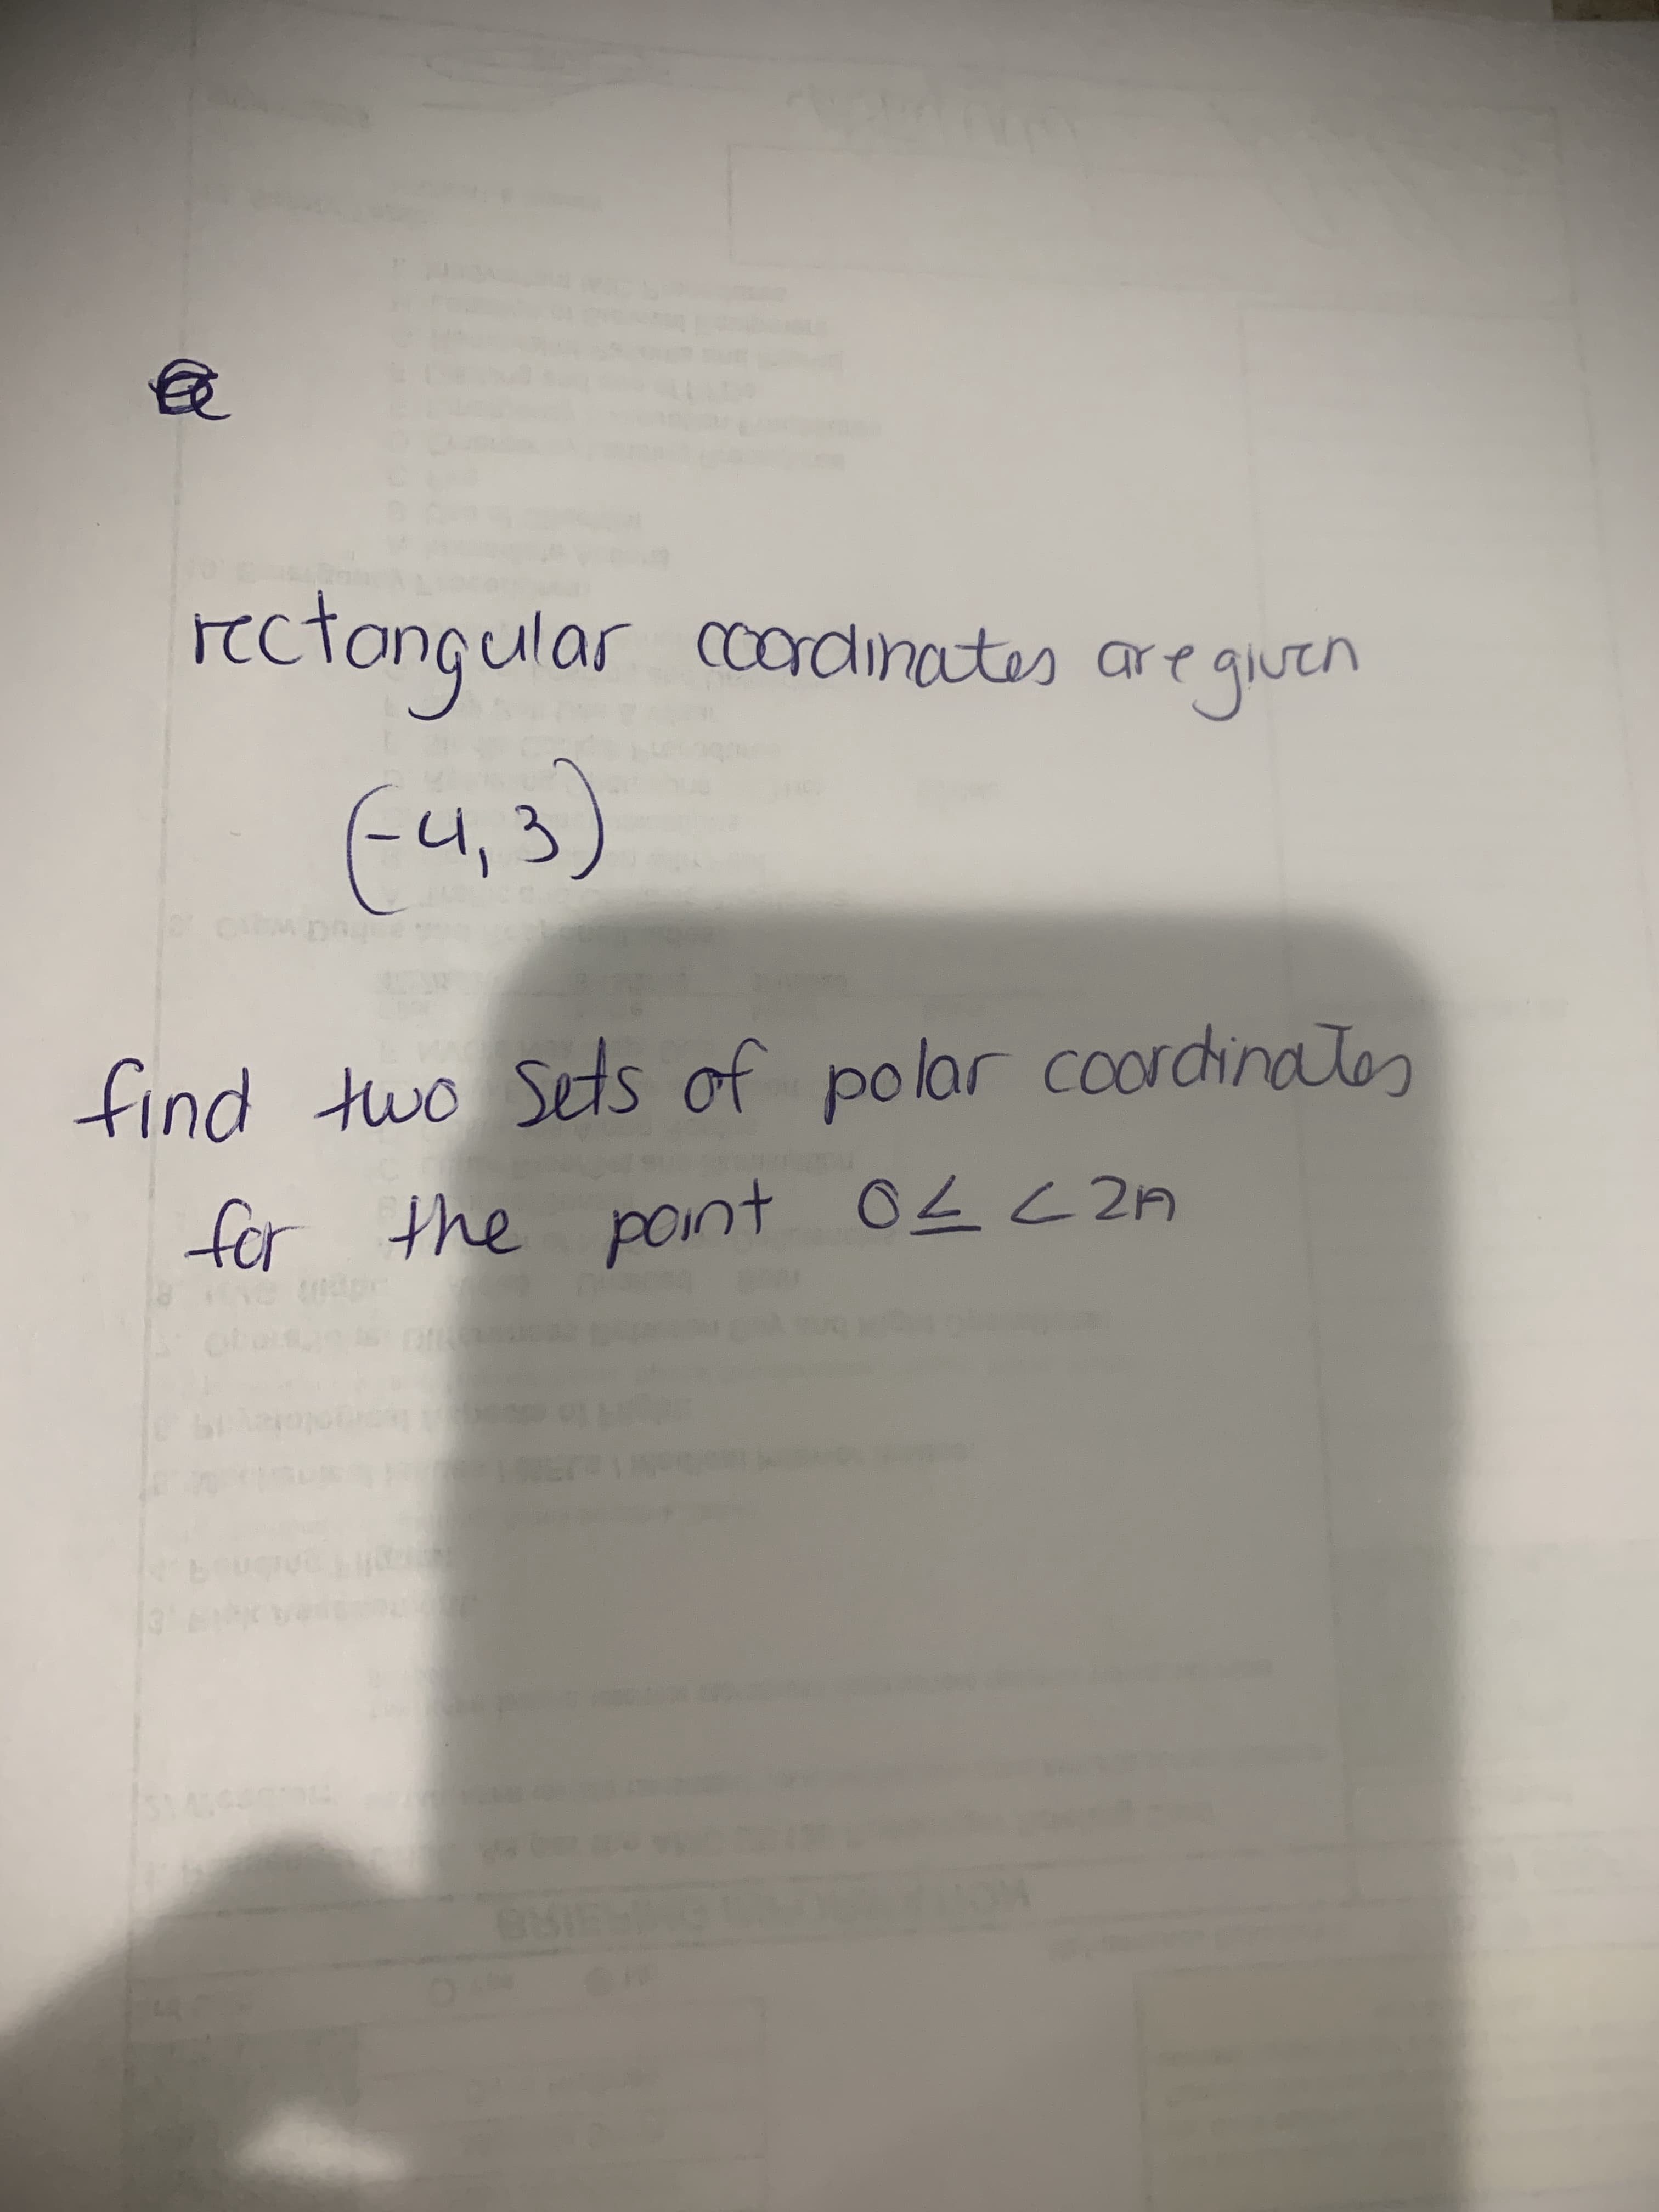 Itctongular
Coordinates aregiven
U,3
find two Sets of polar coordinatos
for the point 02C2A
